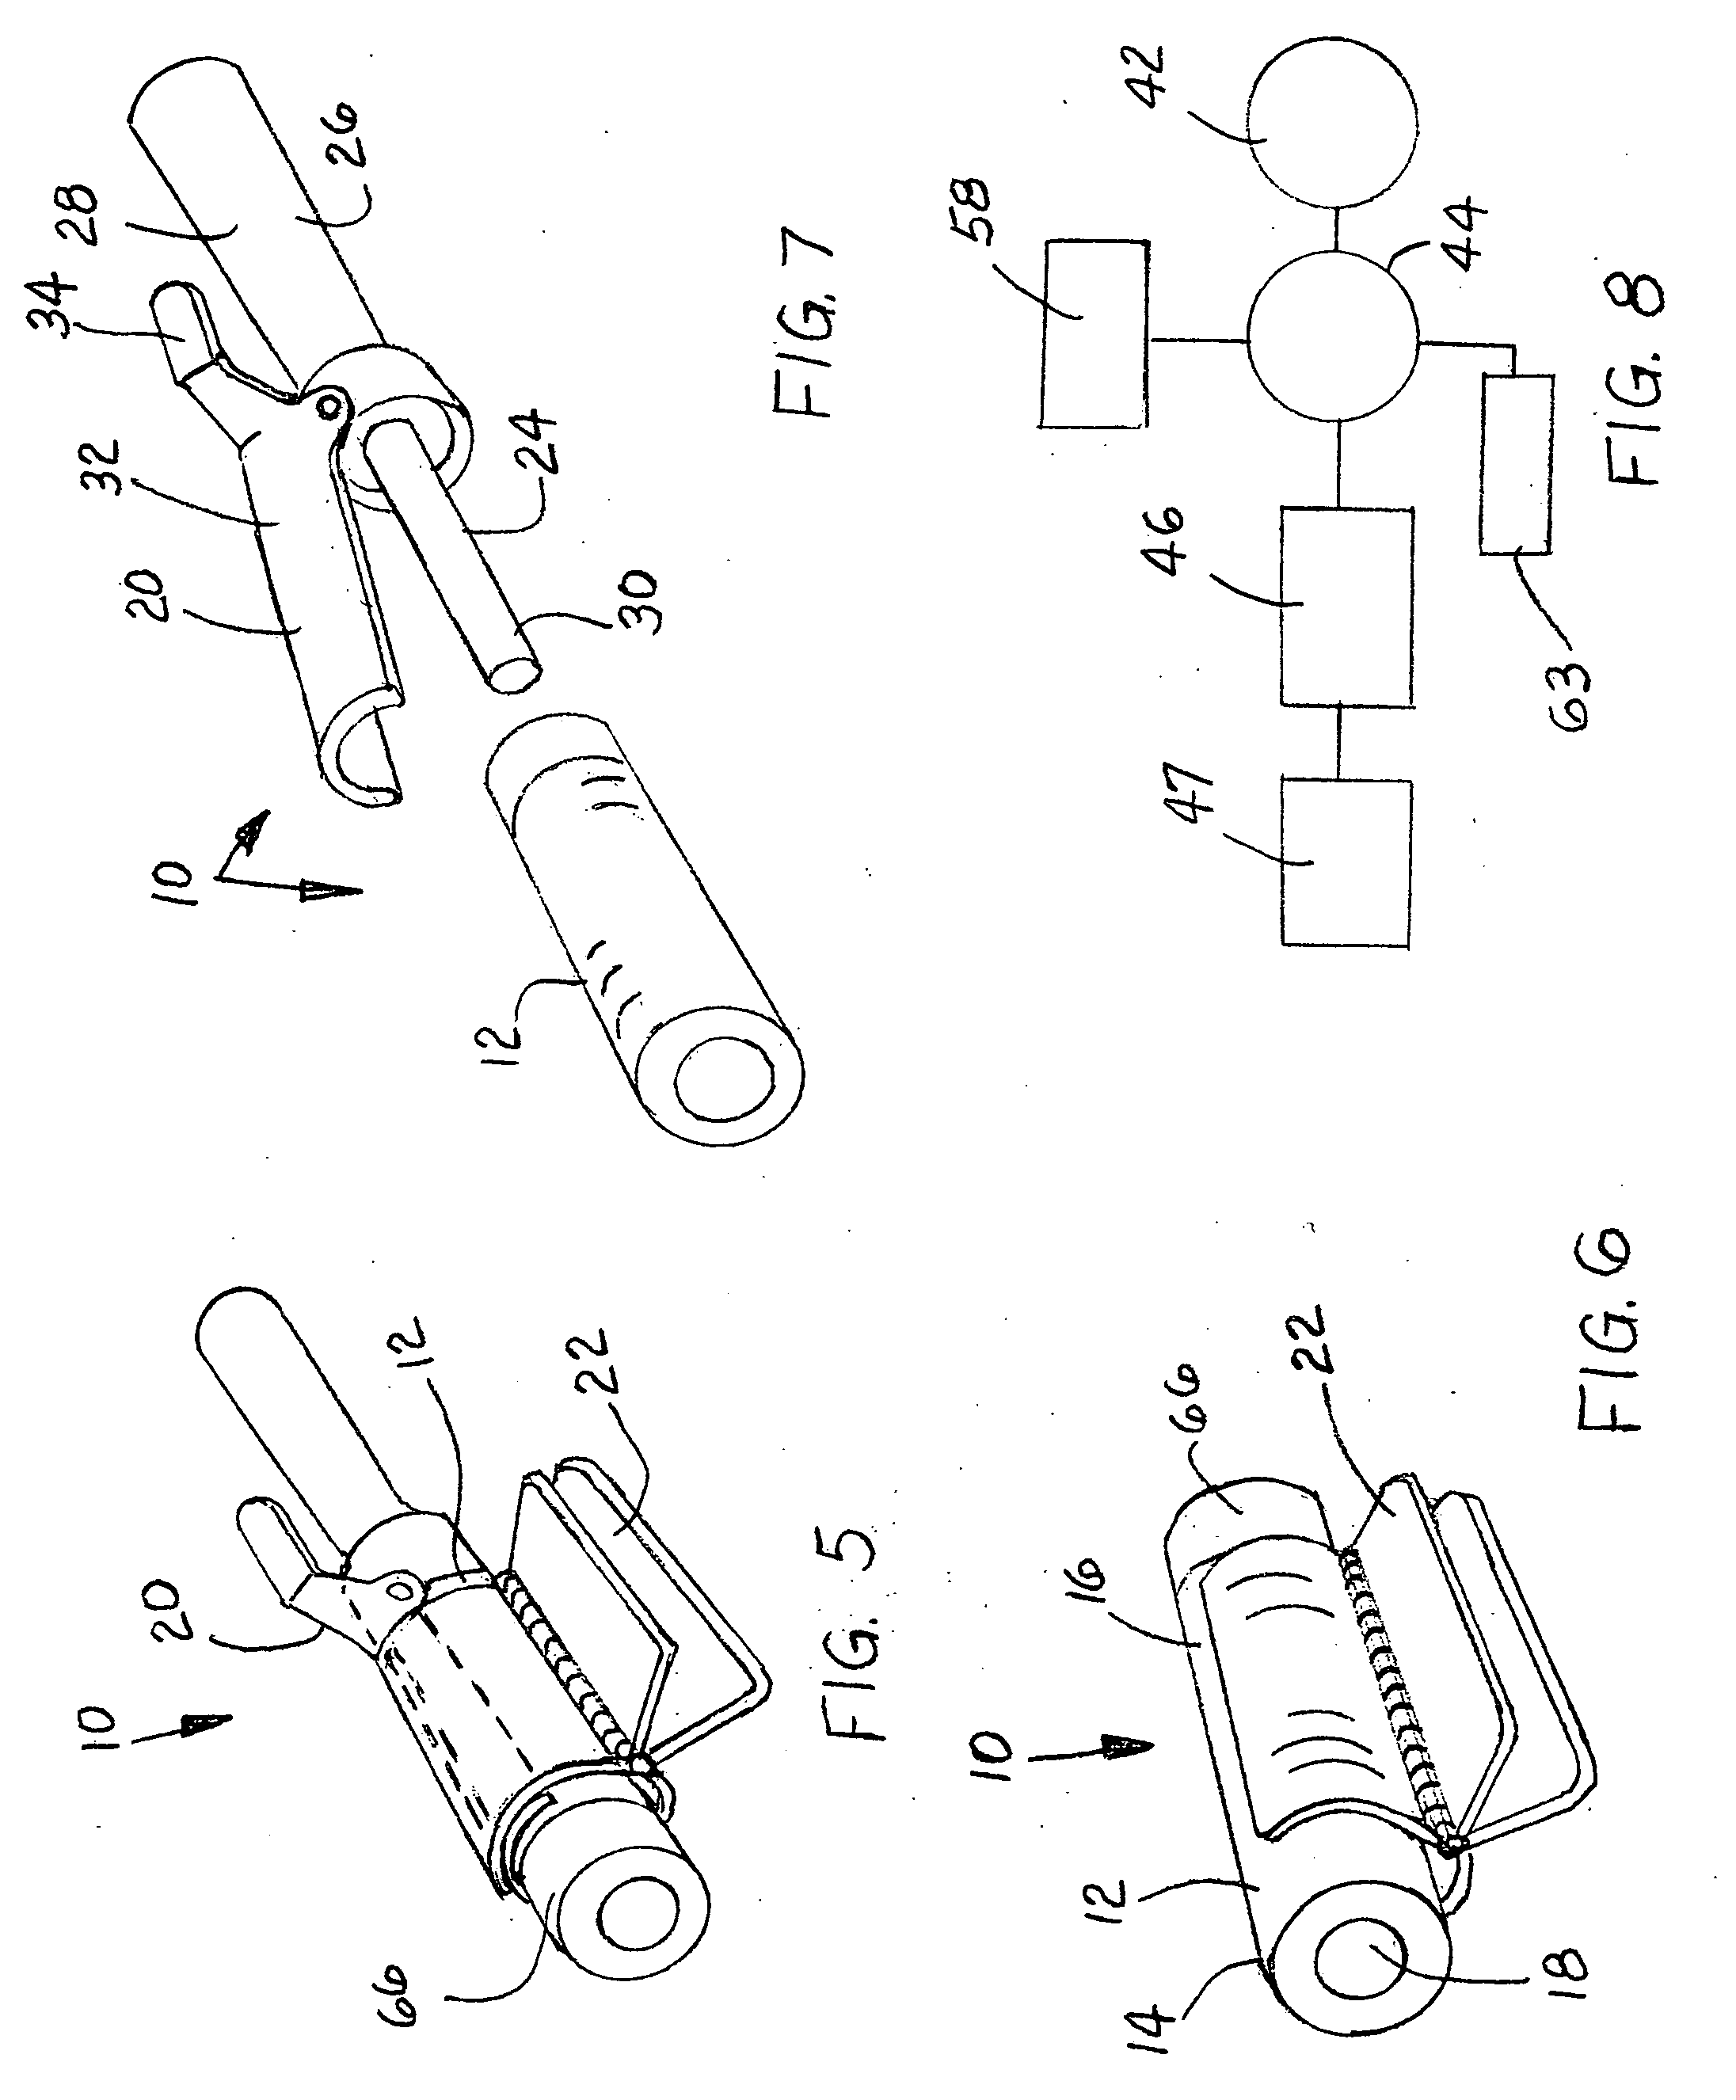 Apparatus for styling hair